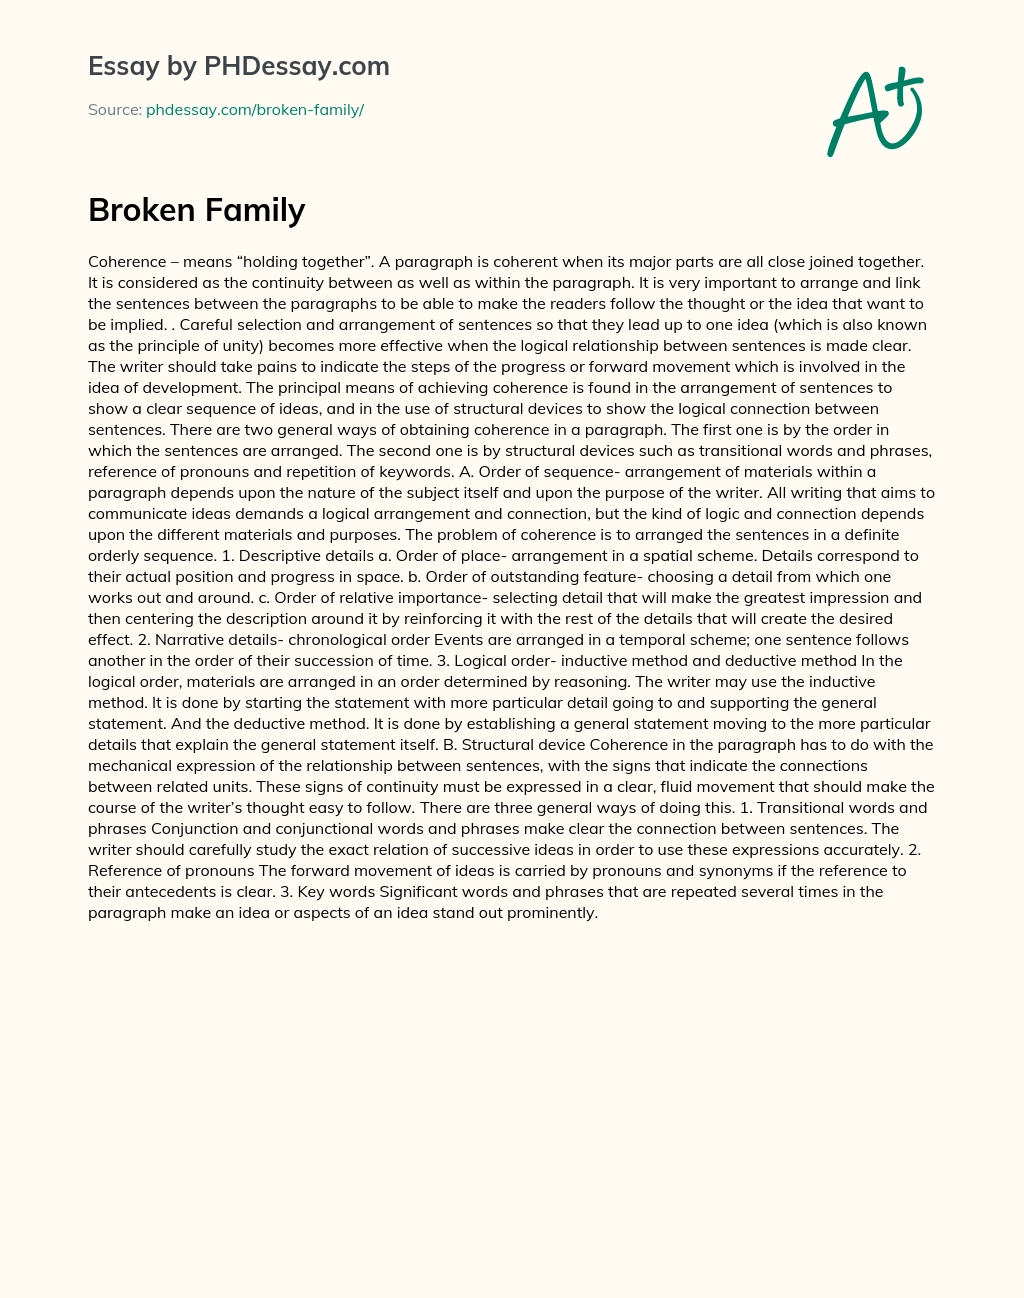 problem solution essay about broken family